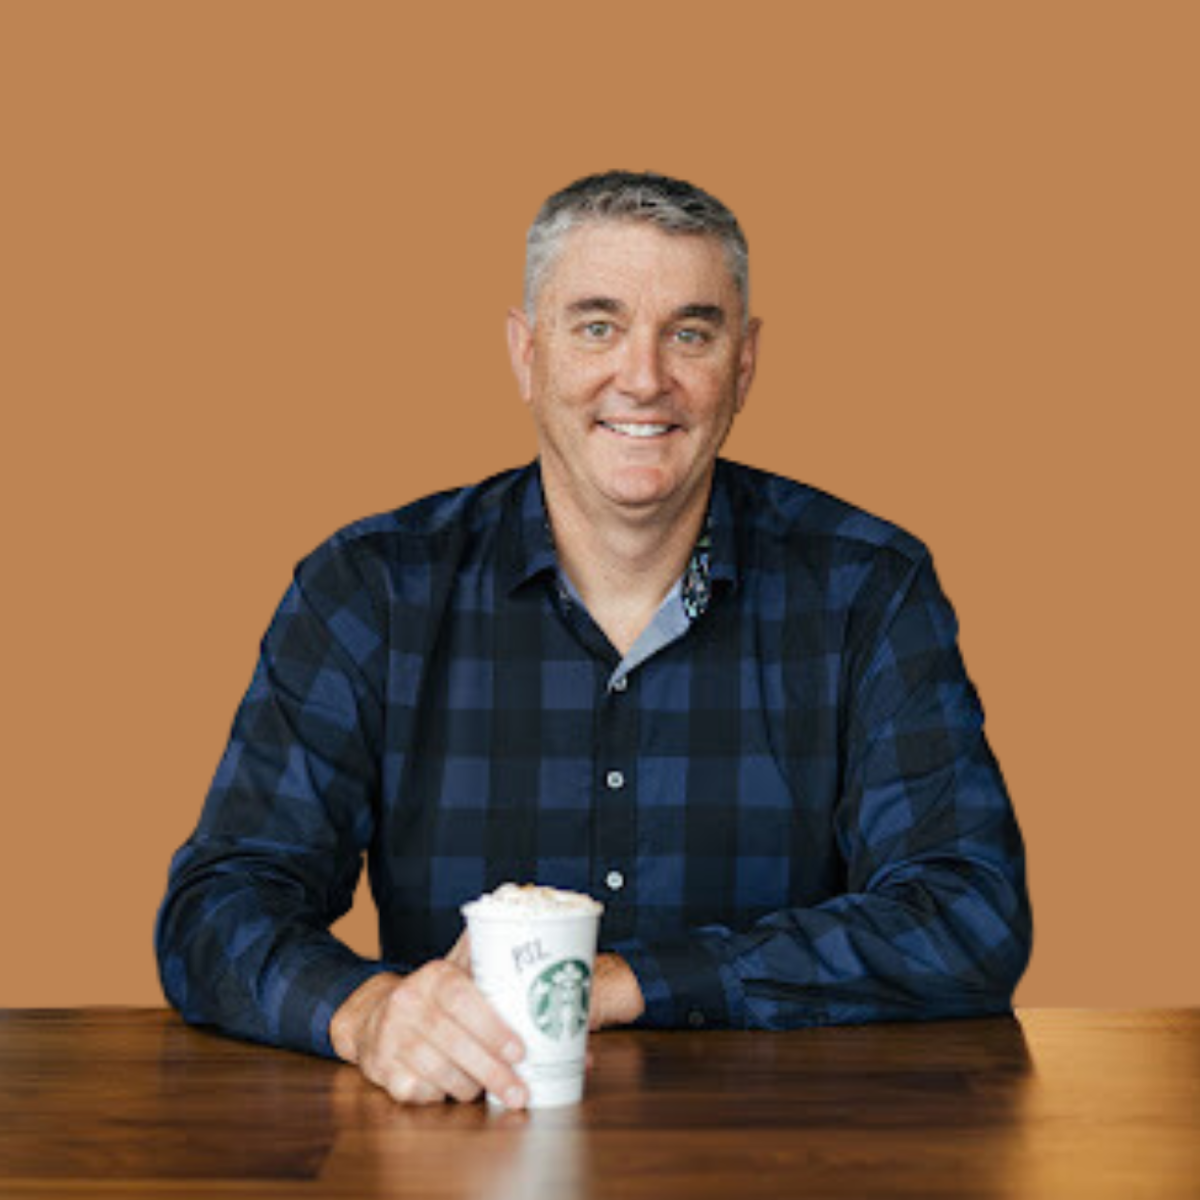 For twenty years, the pumpkin-spiced latte has served as a staple of the fall season and a powerful asset for Starbucks. Peter Dukes, the creator of the famed latte, still reflects on the days before its creation. “When we were first conceptualizing the idea of the drink, pumpkin spice or pumpkin-flavored products weren’t even an idea. In this day and age, you could probably fill two whole grocery aisles with pumpkin spice products,” Dukes said. 